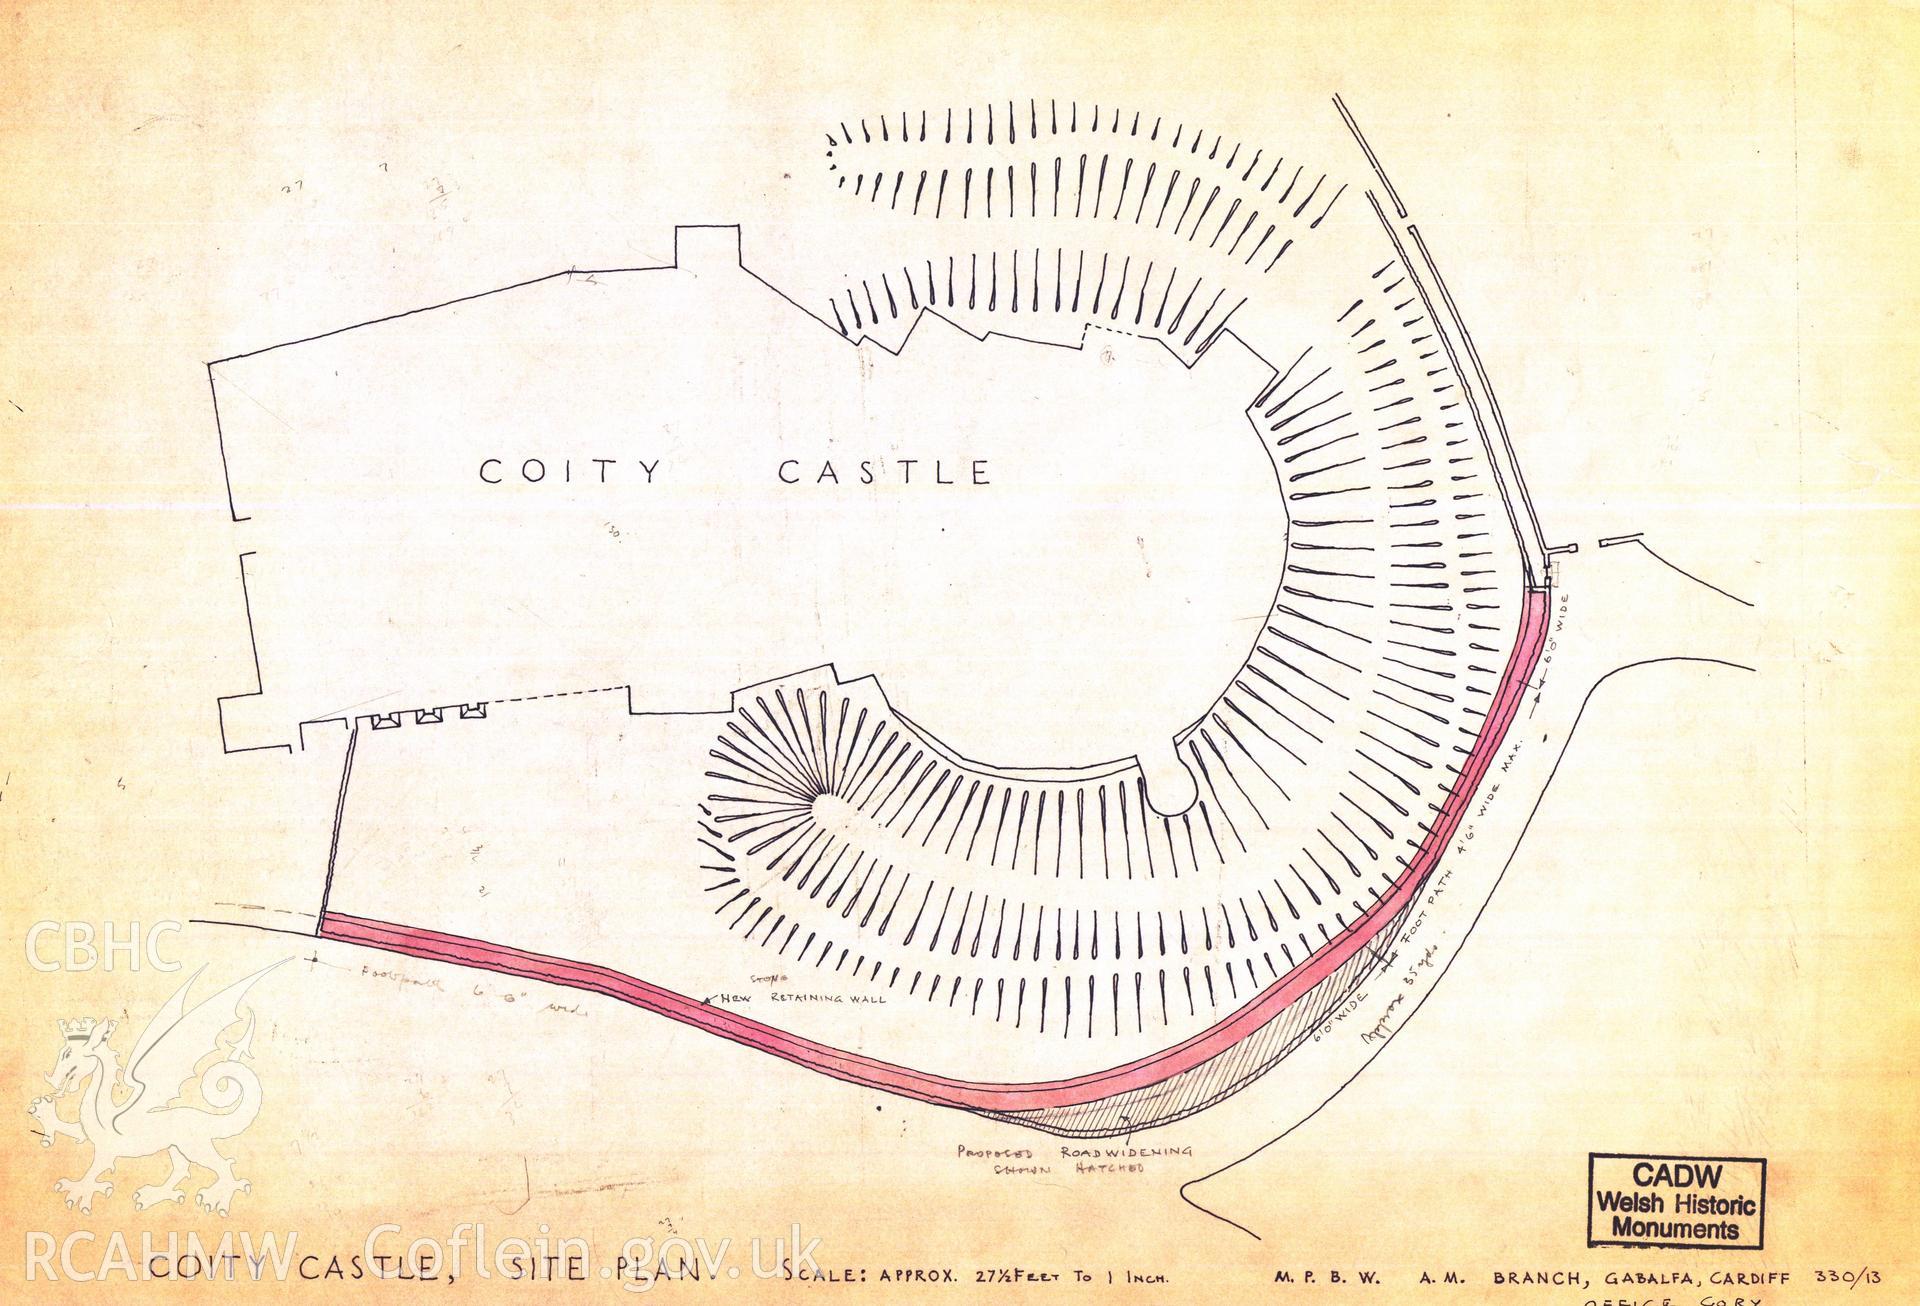 Cadw guardianship monument drawing of Coity Castle. Road widening. Cadw Ref. No:330/13.